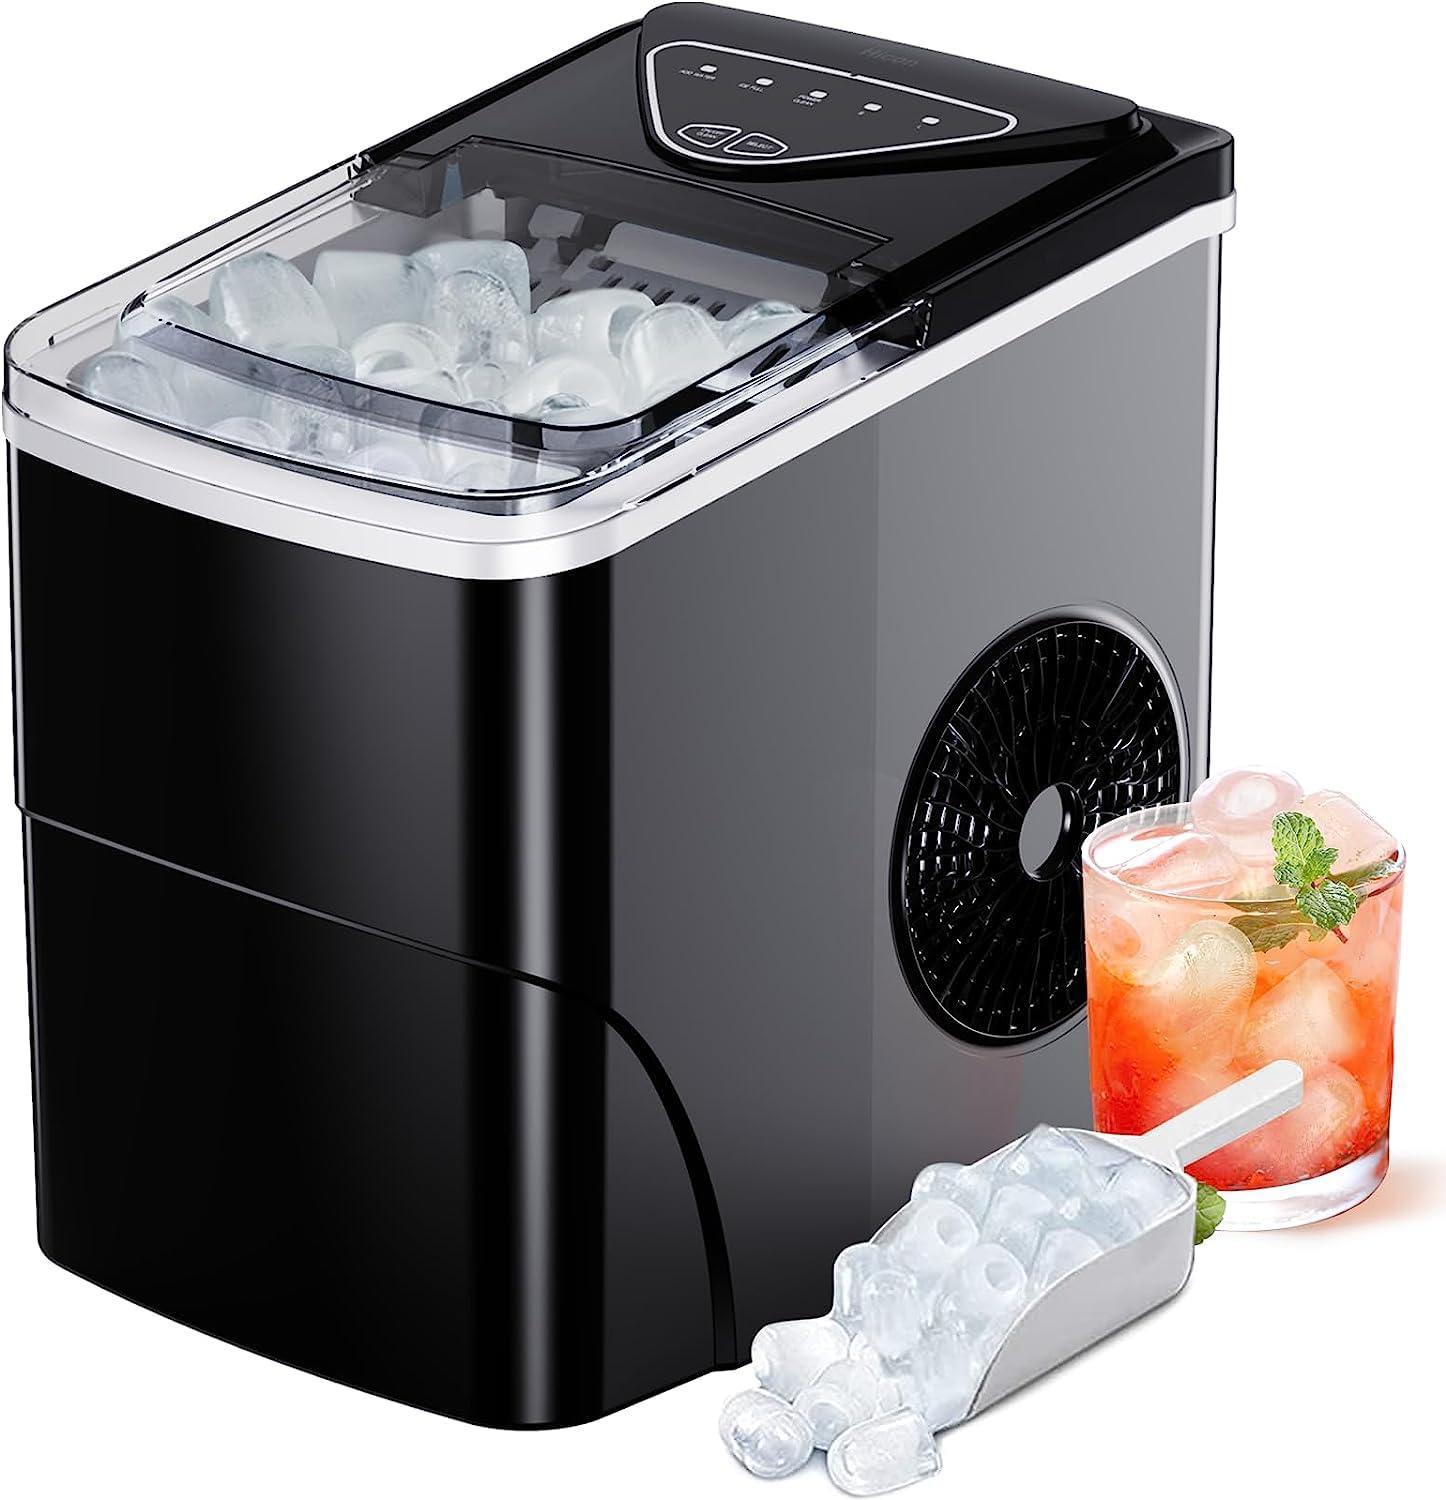 Advwin 12KG Countertop Ice Maker Self-Cleaning Ice Machine Black